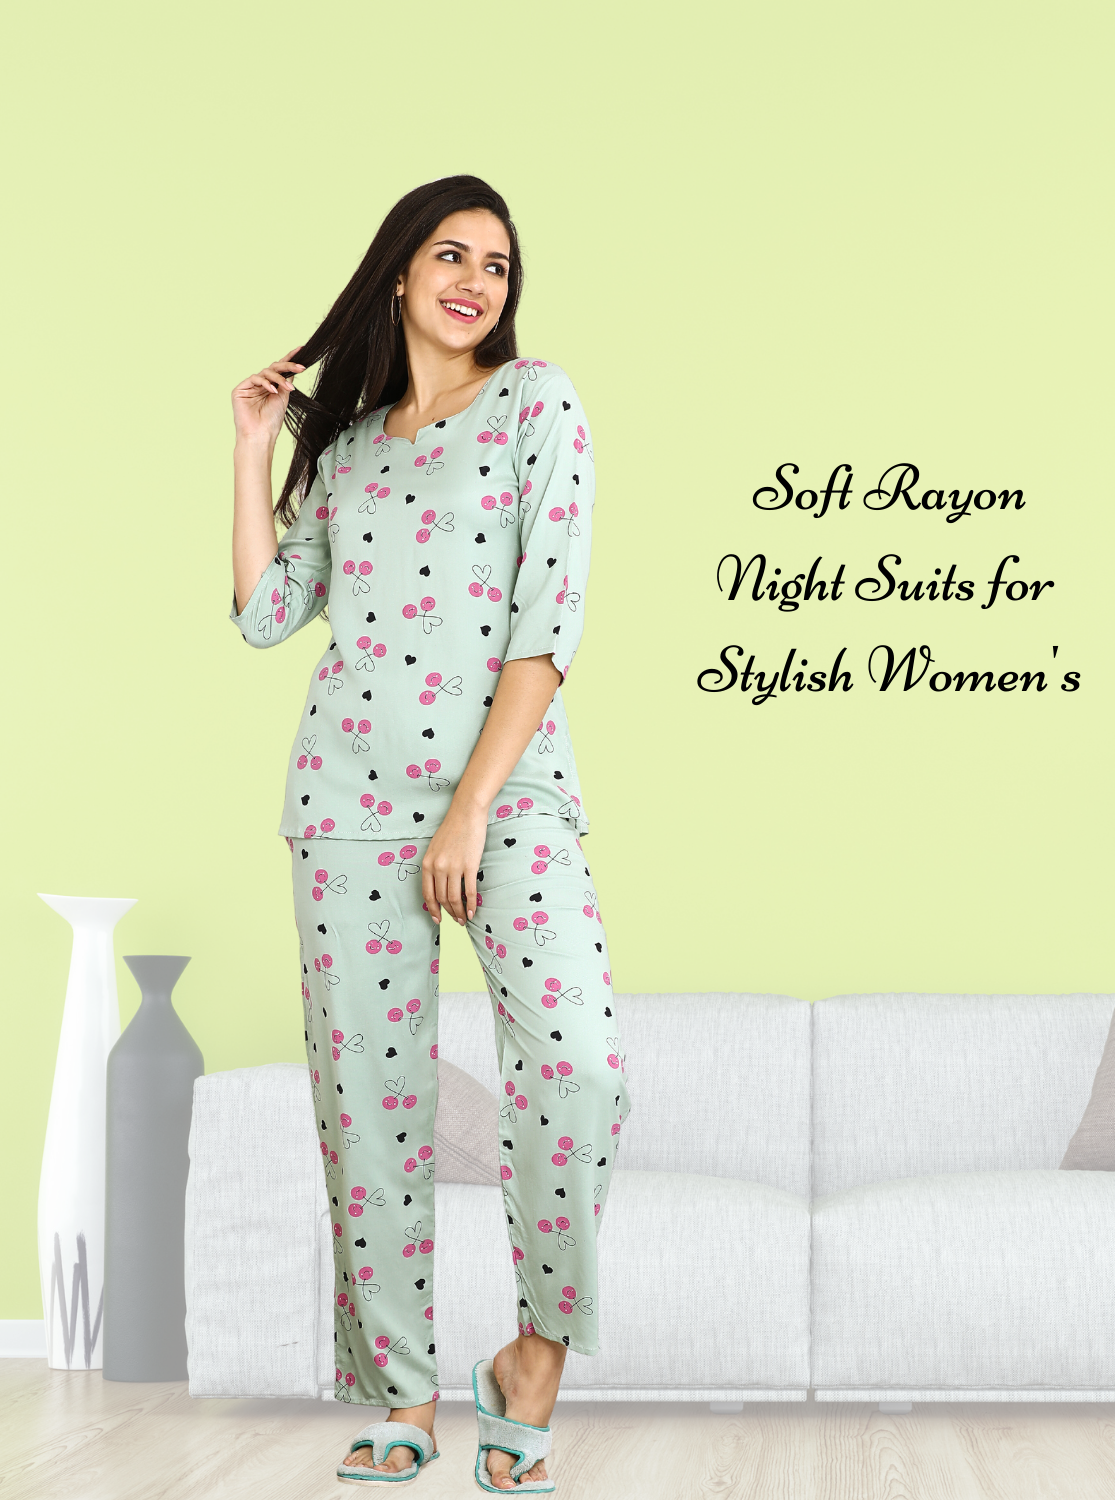 ONLY MINE Rayon Printed Top & Bottom Set Night Suits- Stylish Printed Top & Bottom Set for Trendy Women's